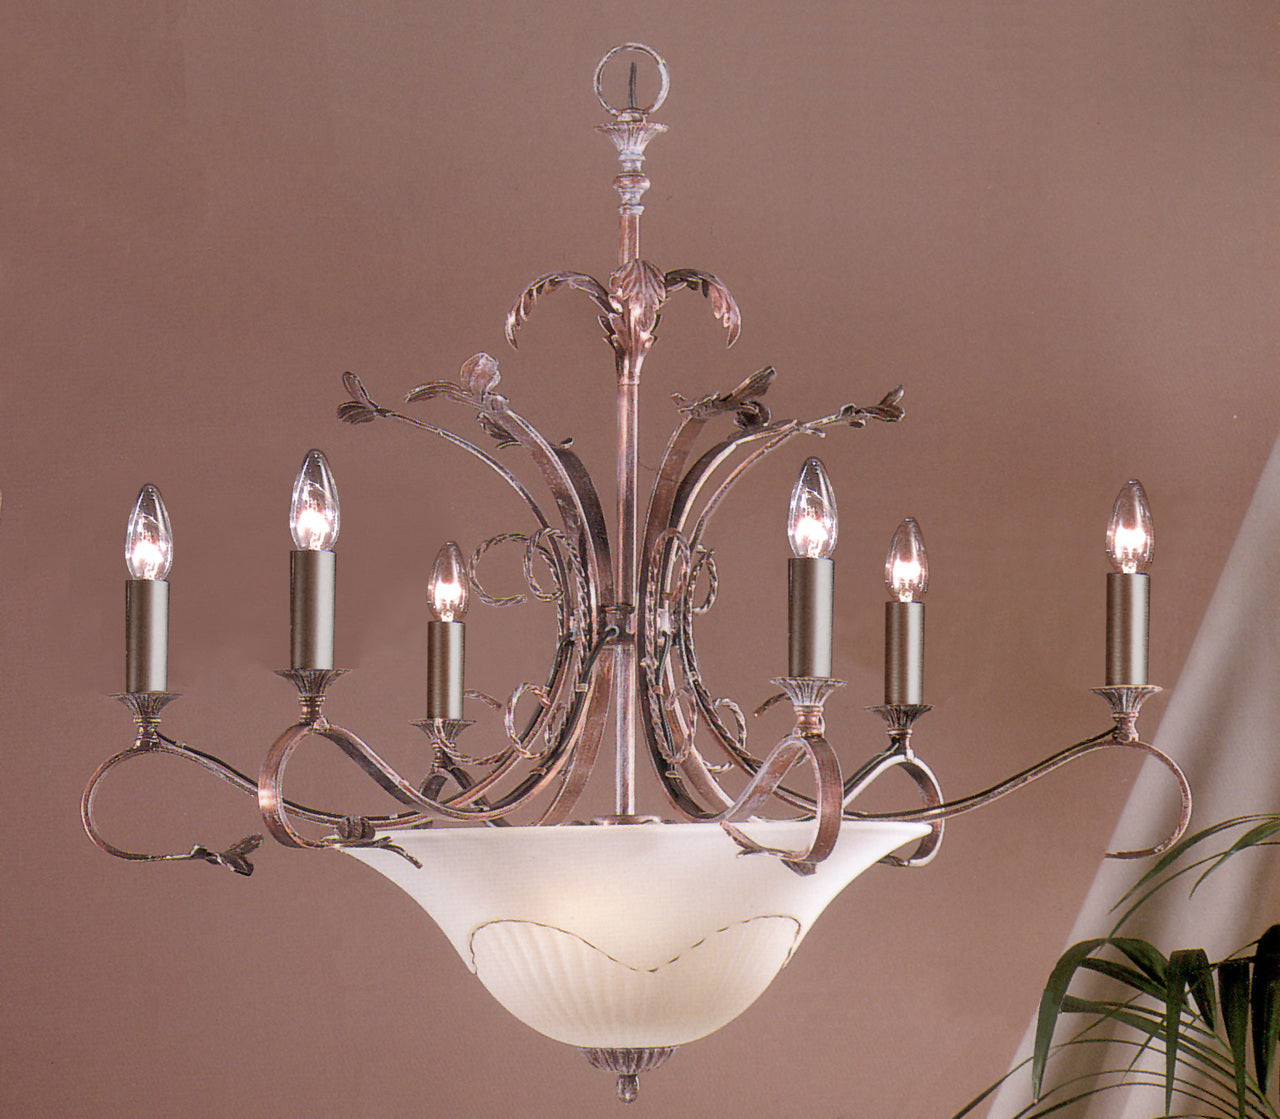 Classic Lighting 4118 WC Treviso Wrought Iron Chandelier in Weathered Clay (Imported from Italy)